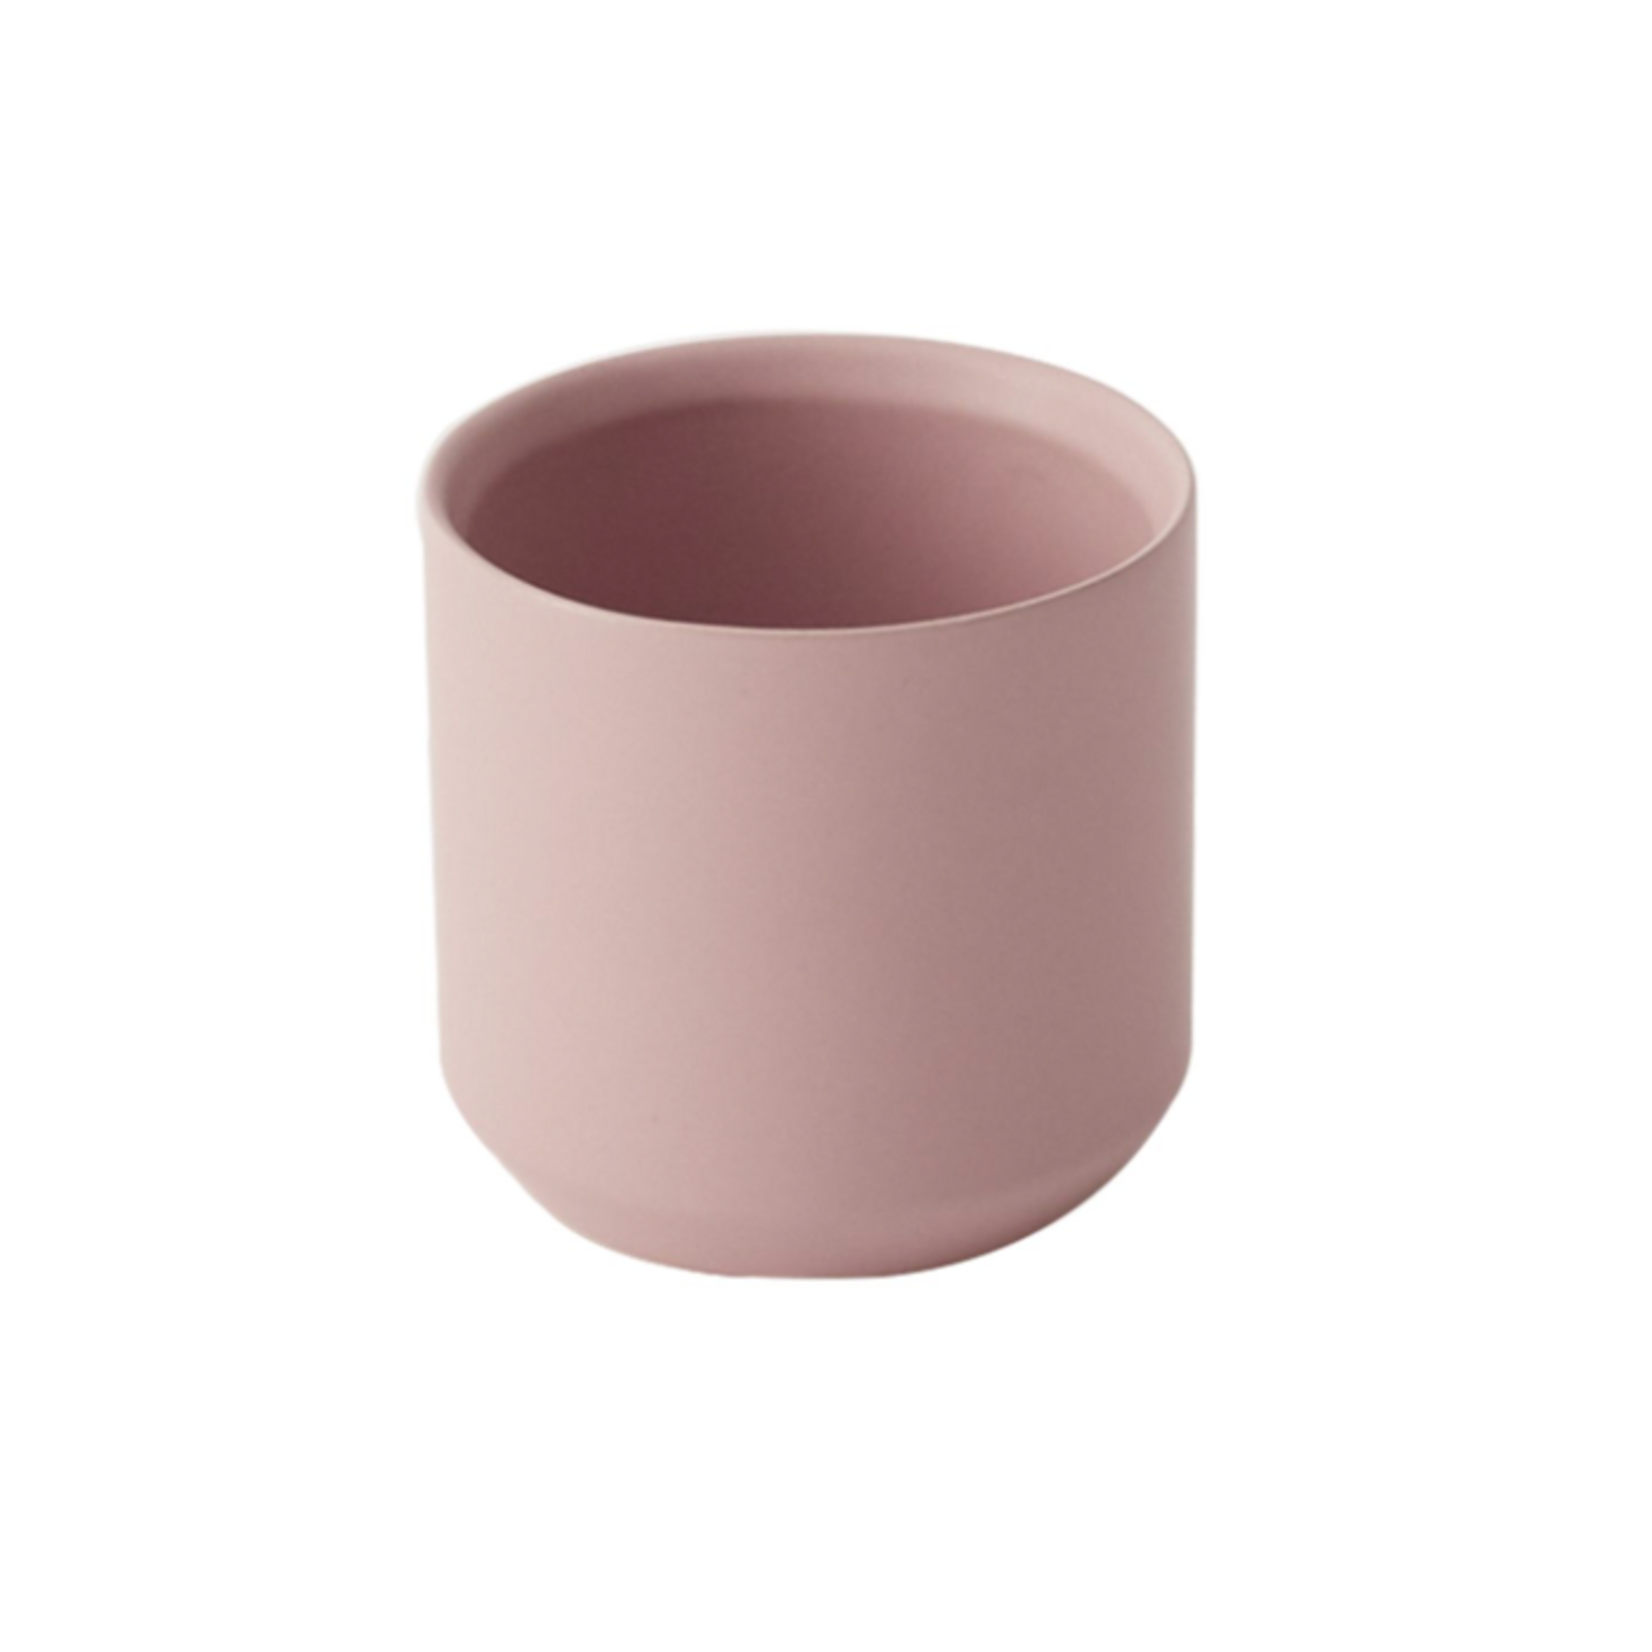 2.75”H X 3.25” PINK KENDALL POT COLLECTION (AD)